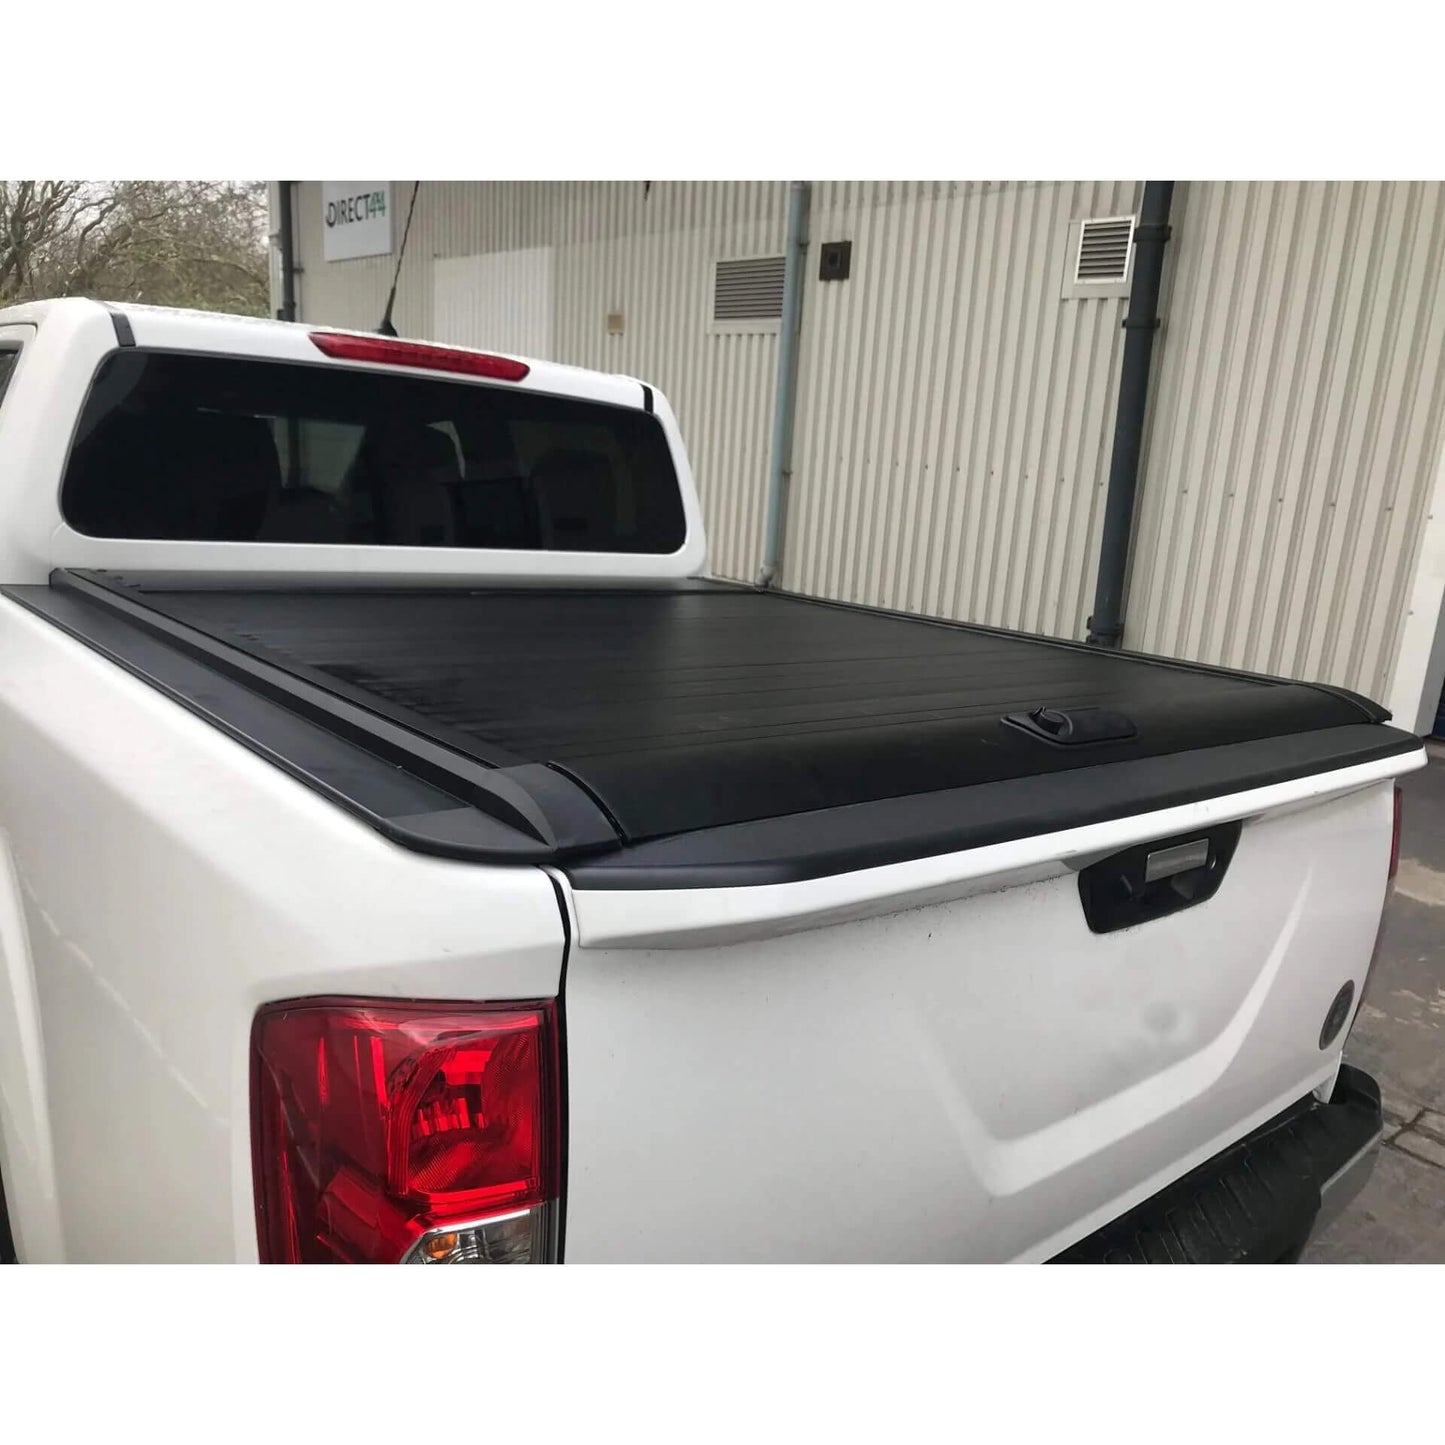 Roll & Lock Style Tonneau Cover for Nissan Navara NP300 2015+ [Rollbar Incompatible]